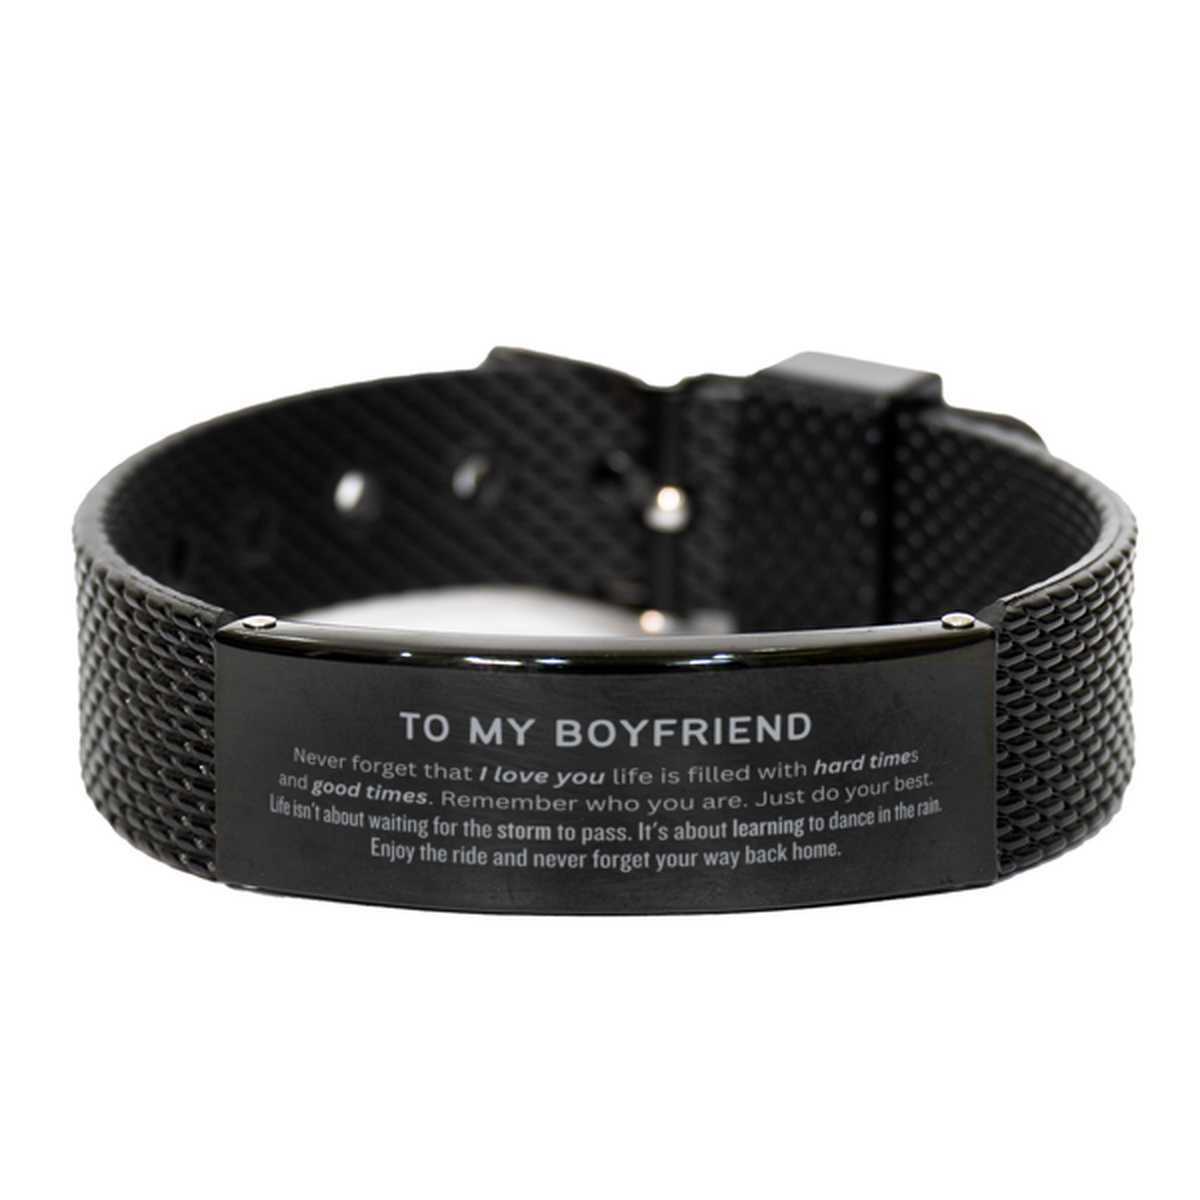 Christmas Boyfriend Black Shark Mesh Bracelet Gifts, To My Boyfriend Birthday Thank You Gifts For Boyfriend, Graduation Unique Gifts For Boyfriend To My Boyfriend Never forget that I love you life is filled with hard times and good times. Remember who you